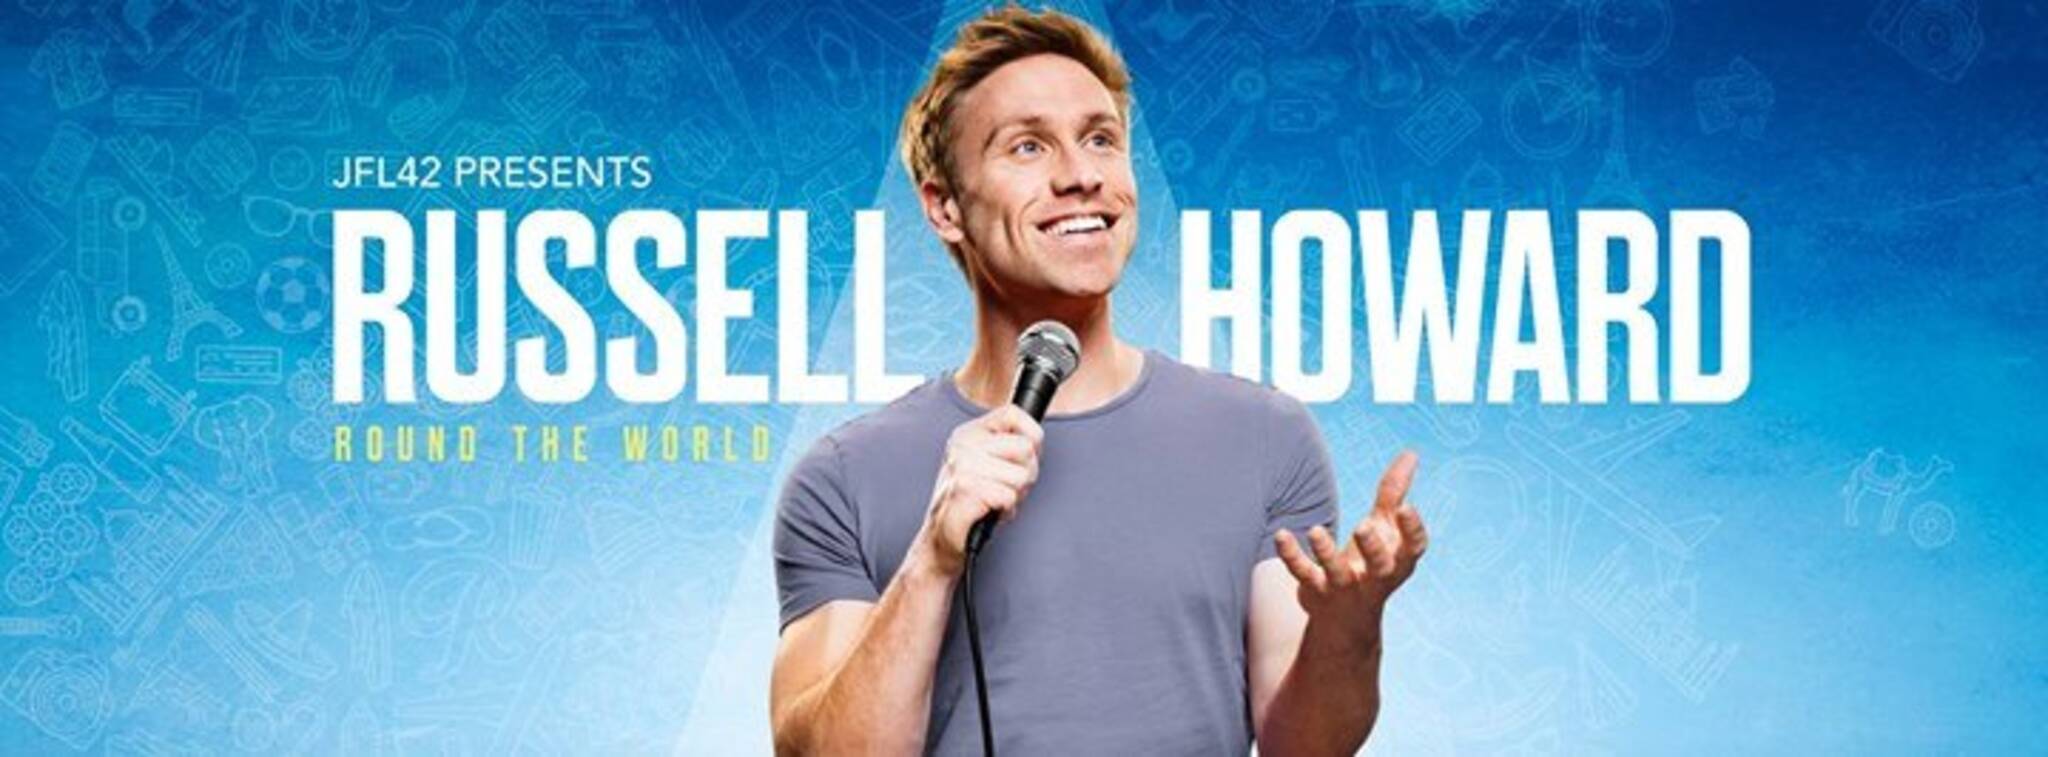 russell howard tour names